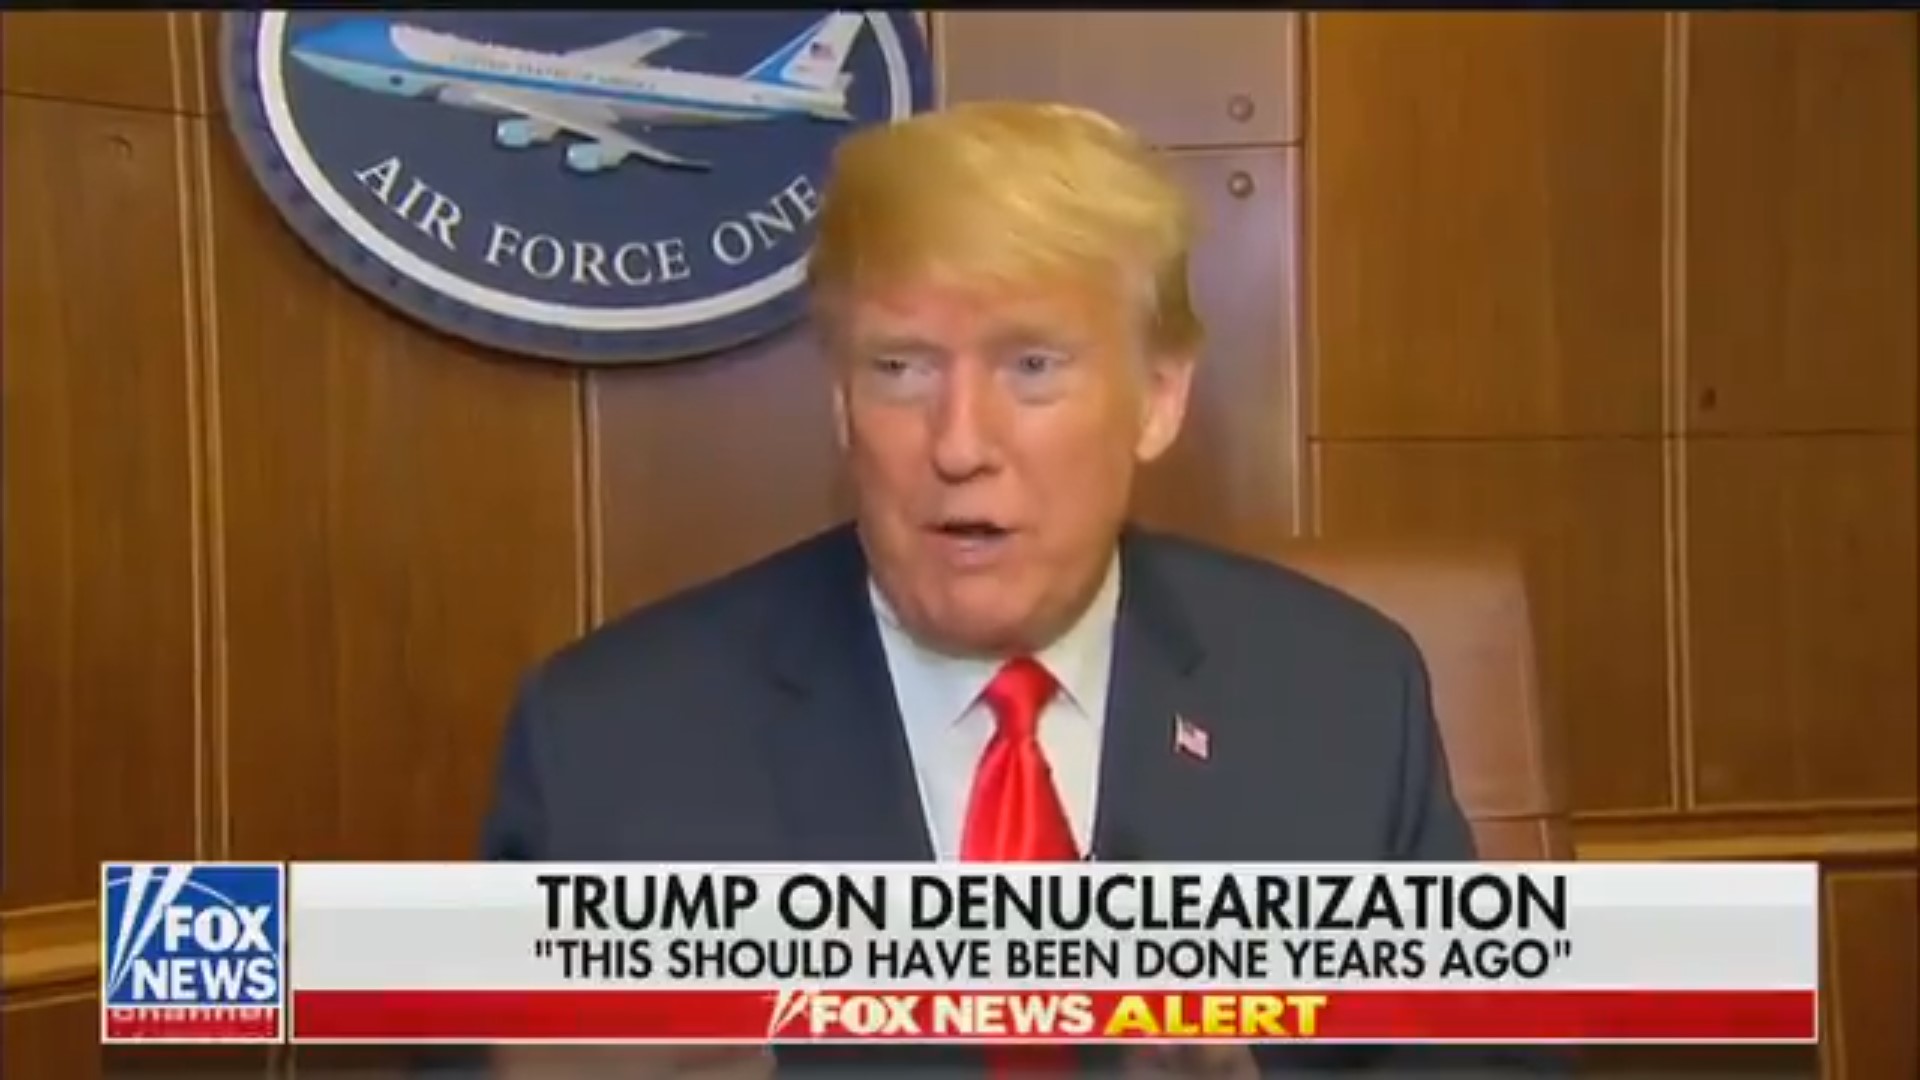 Watch Trump Go Full Whataboutism To Defend Kim Jong Un’s Brutality: Others Have Done ‘Really Bad Things’